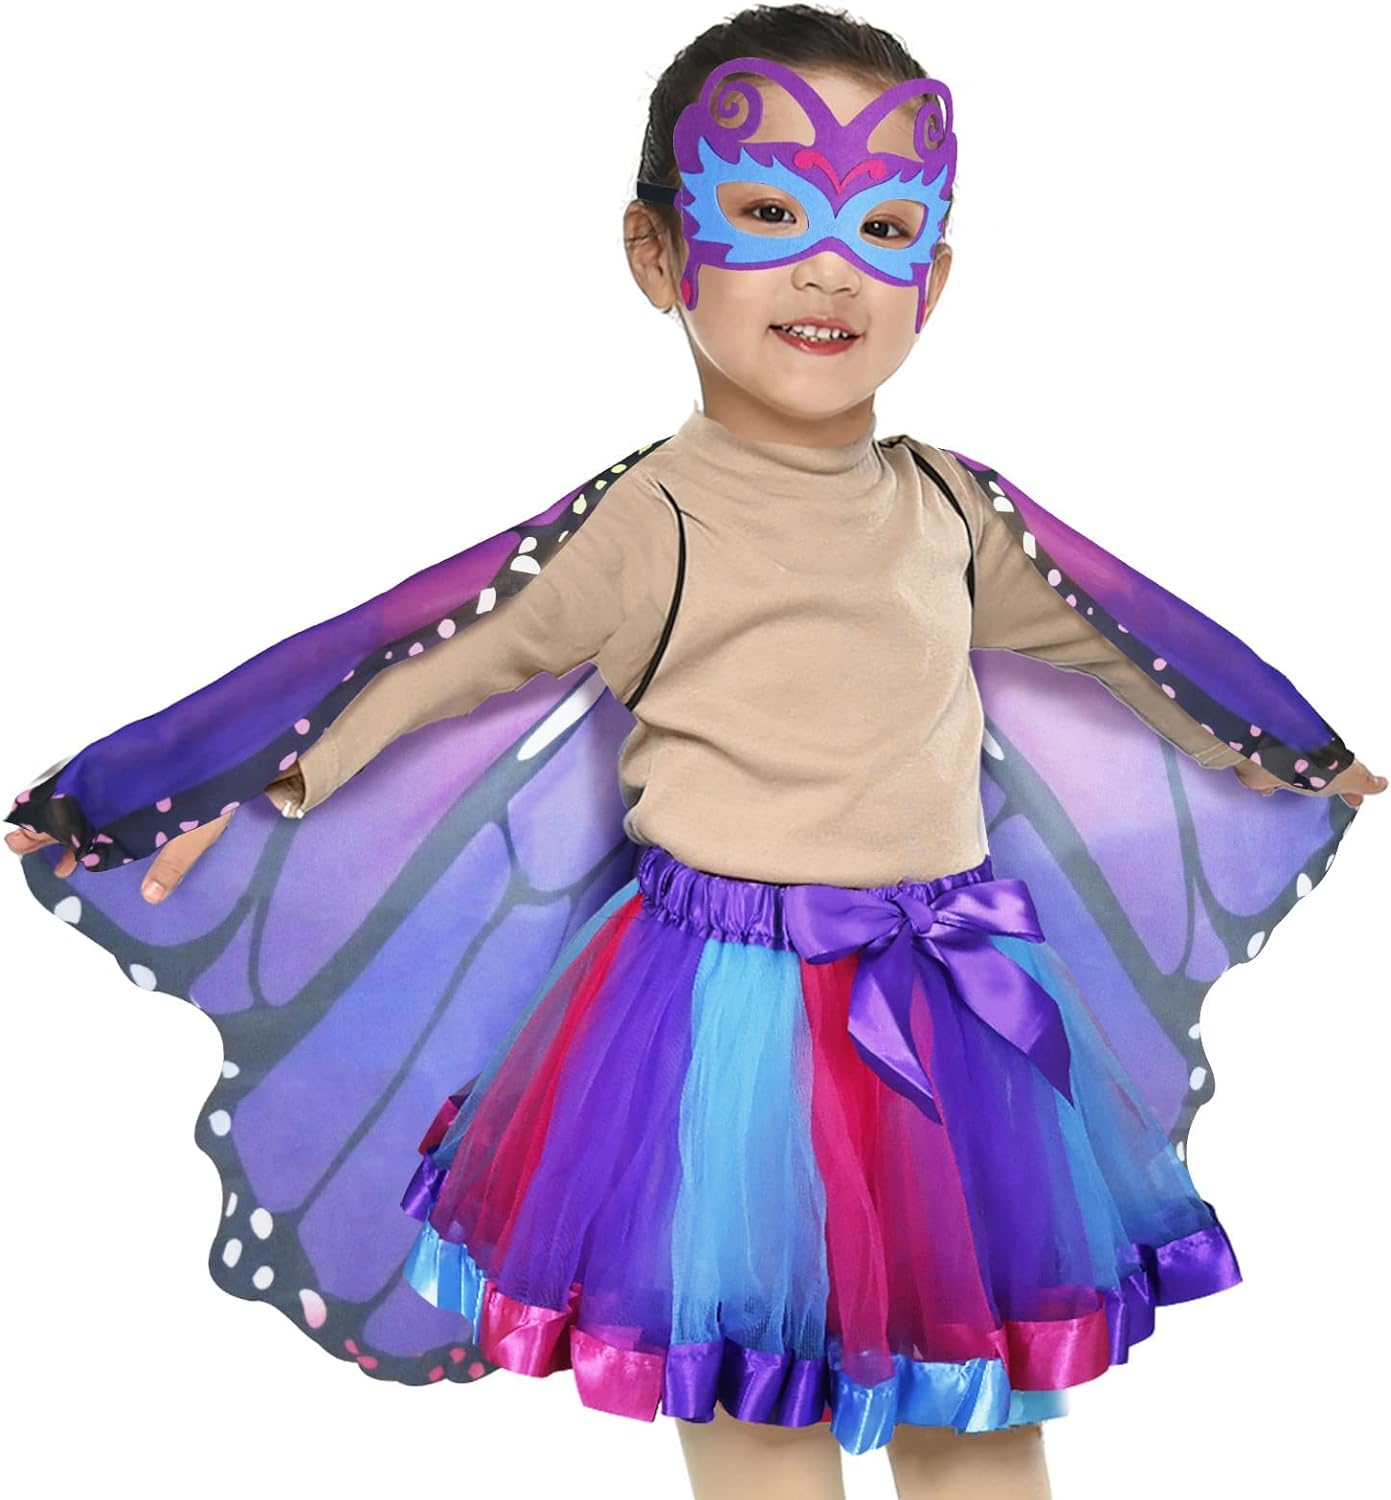 Butterfly Wings for Girls, Butterfly Costume for Party Kids Fairy Wing Dress with Mask and Antenna Headband